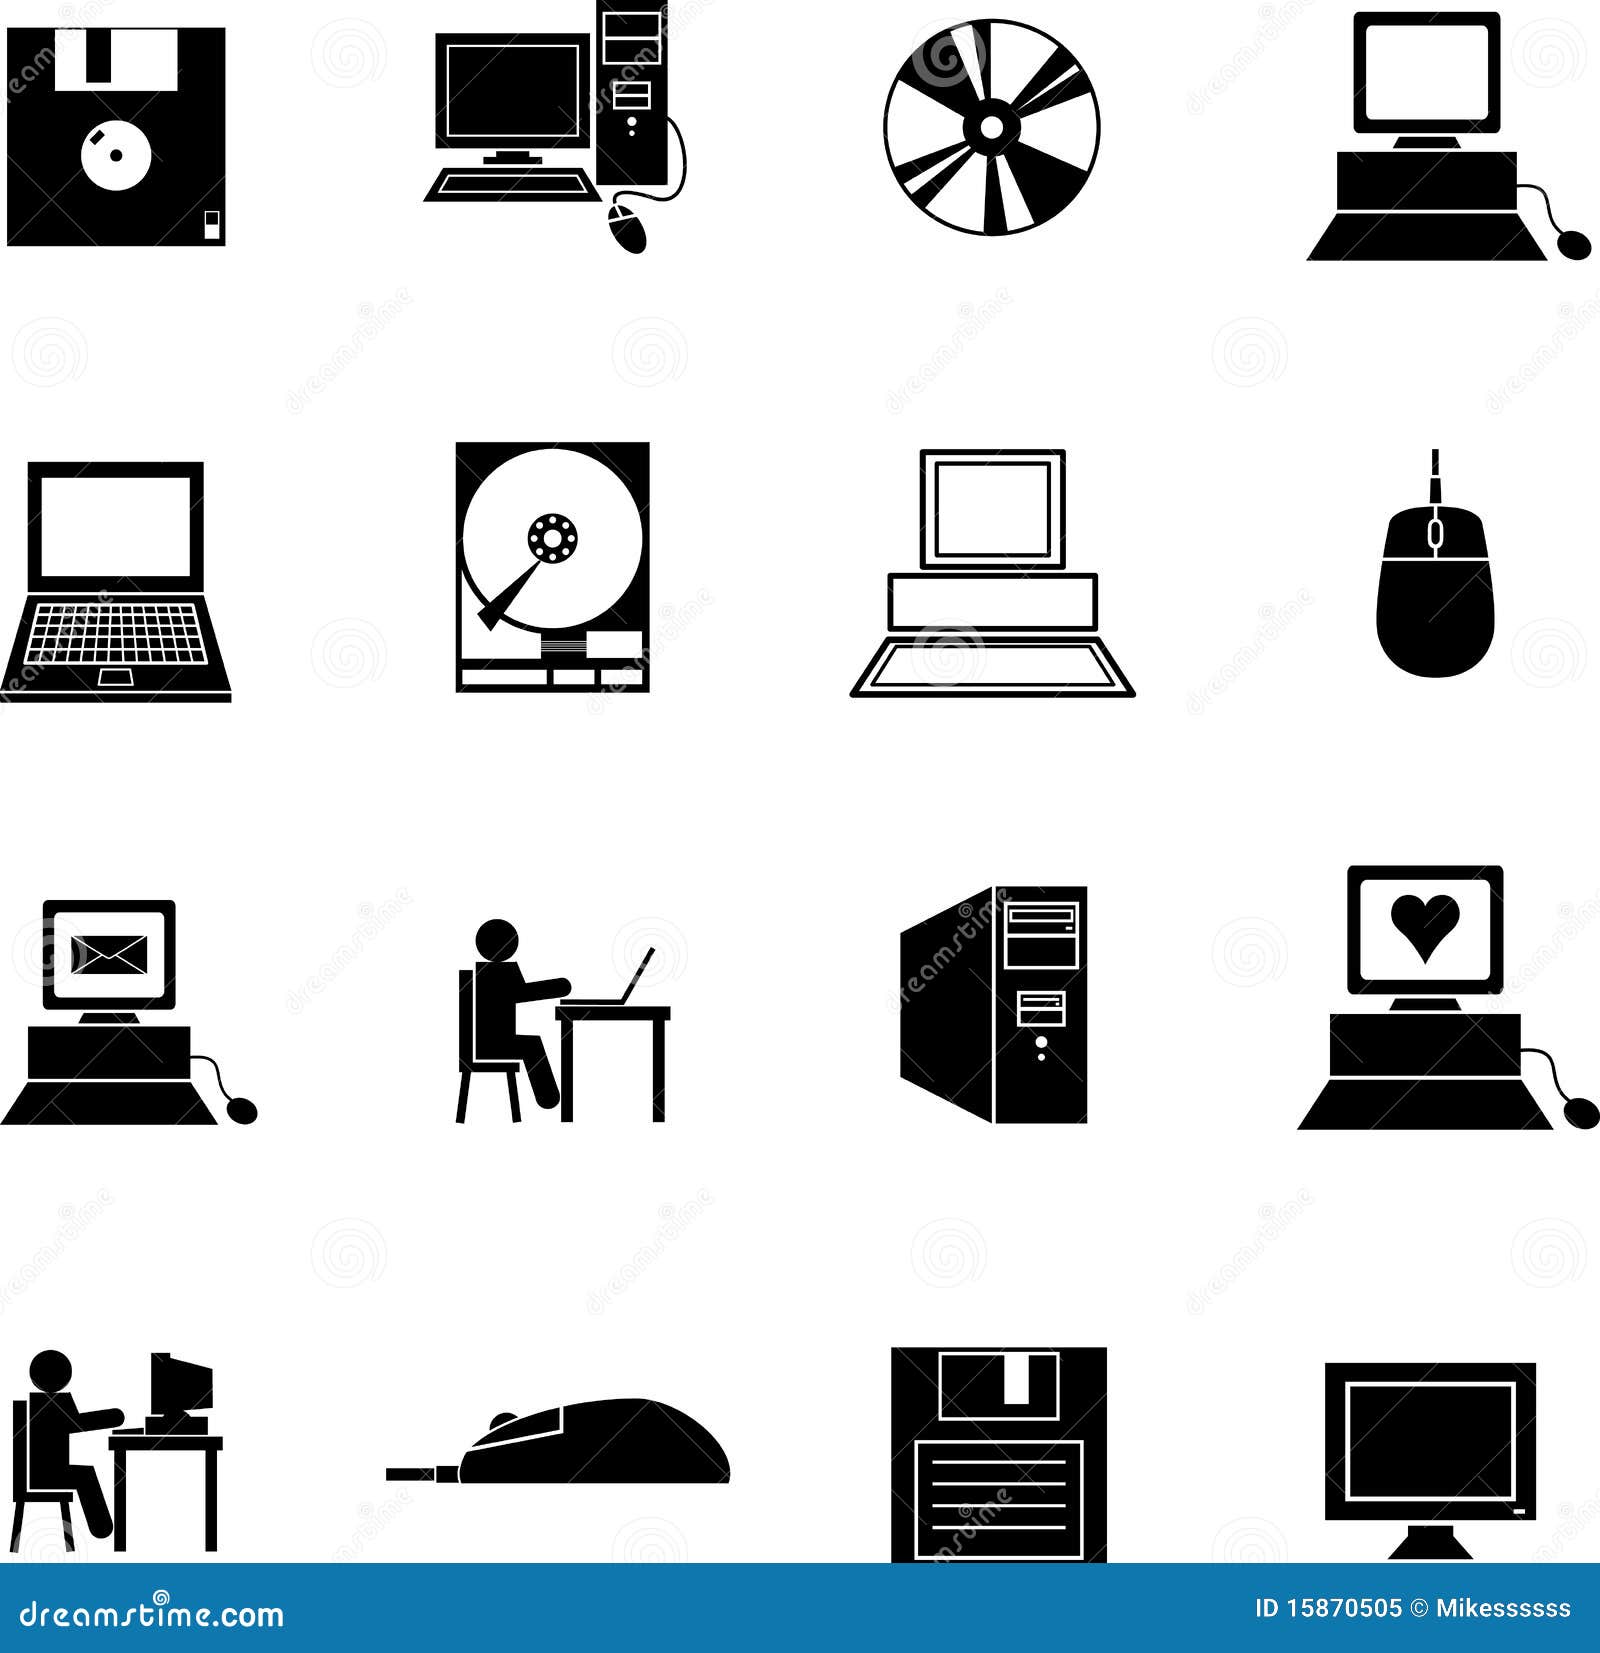 Computer Technology Vector Symbols Or Icons Set Stock ...